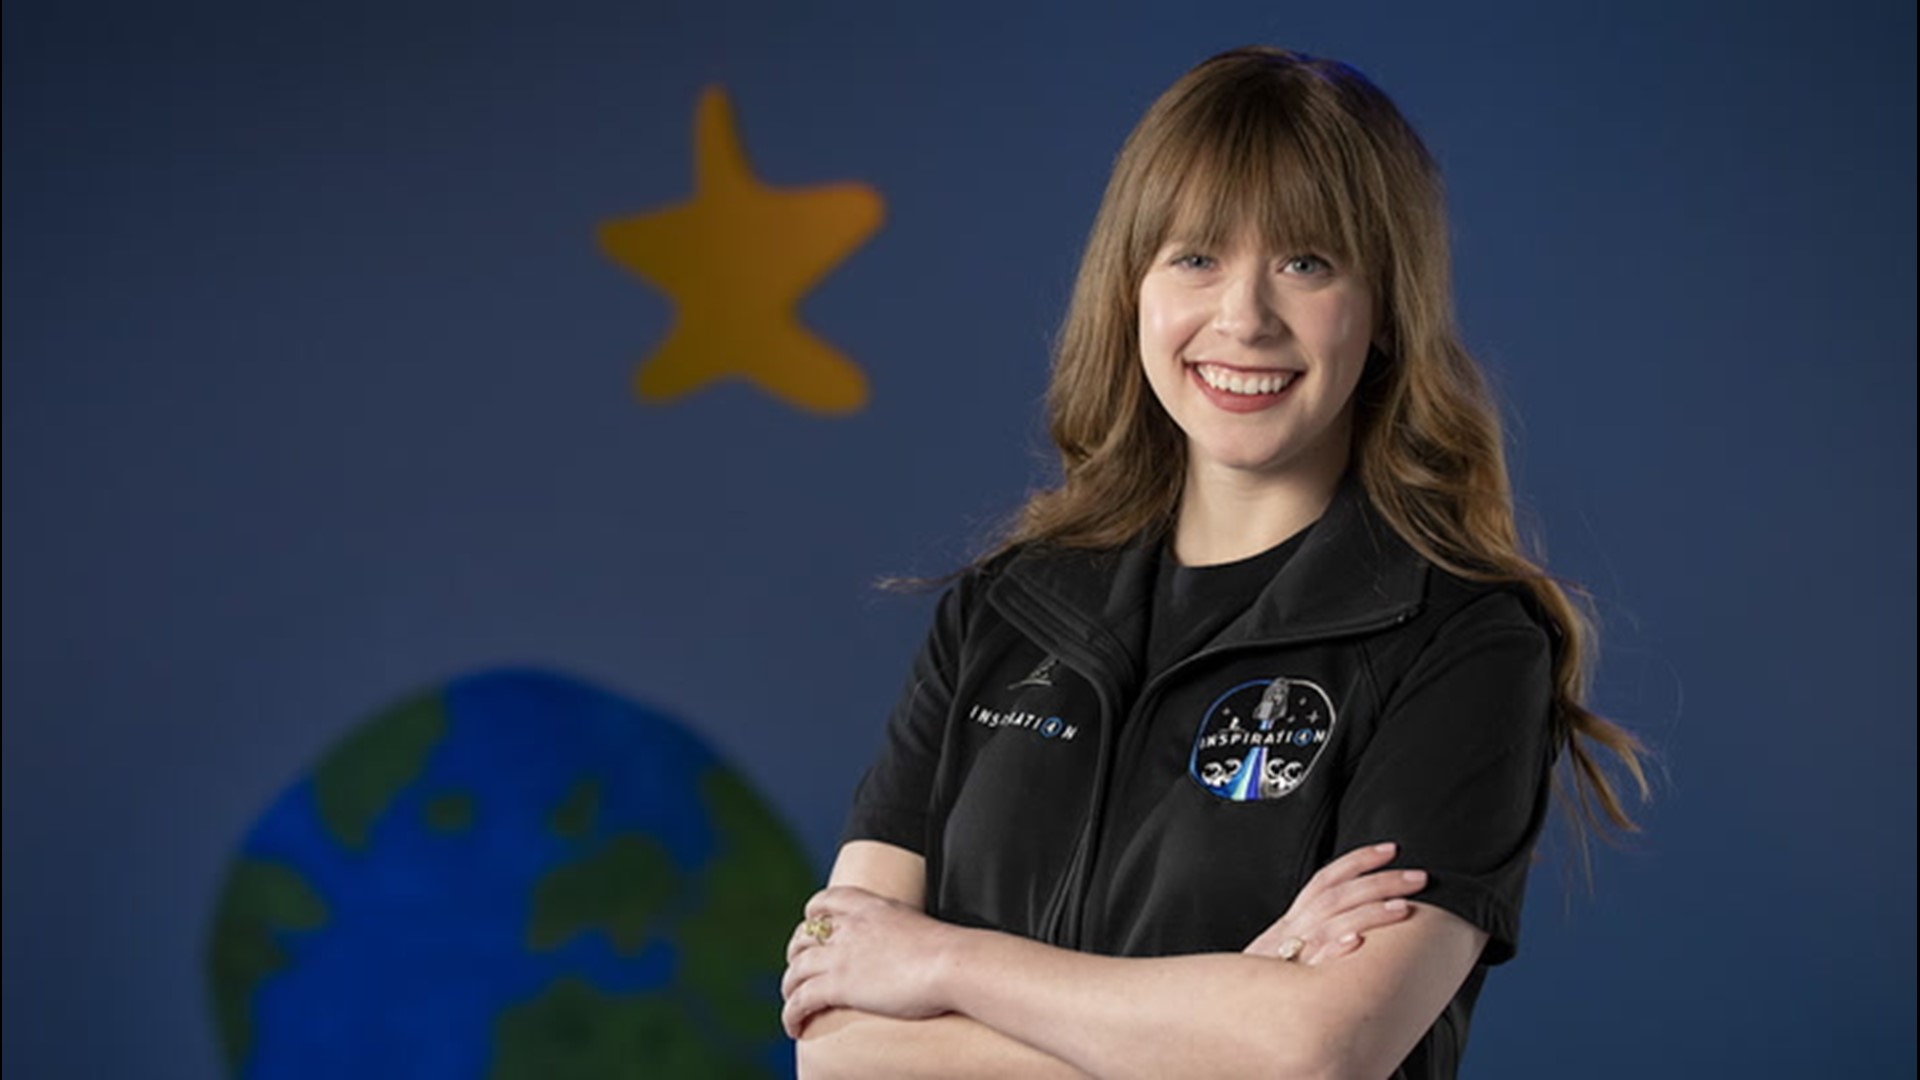 Hayley Arceneaux, 29-year-old cancer survivor, has been selected as the second crew member of the upcoming Inspiration4 SpaceX trip to space, making her the youngest American to leave the atmosphere.